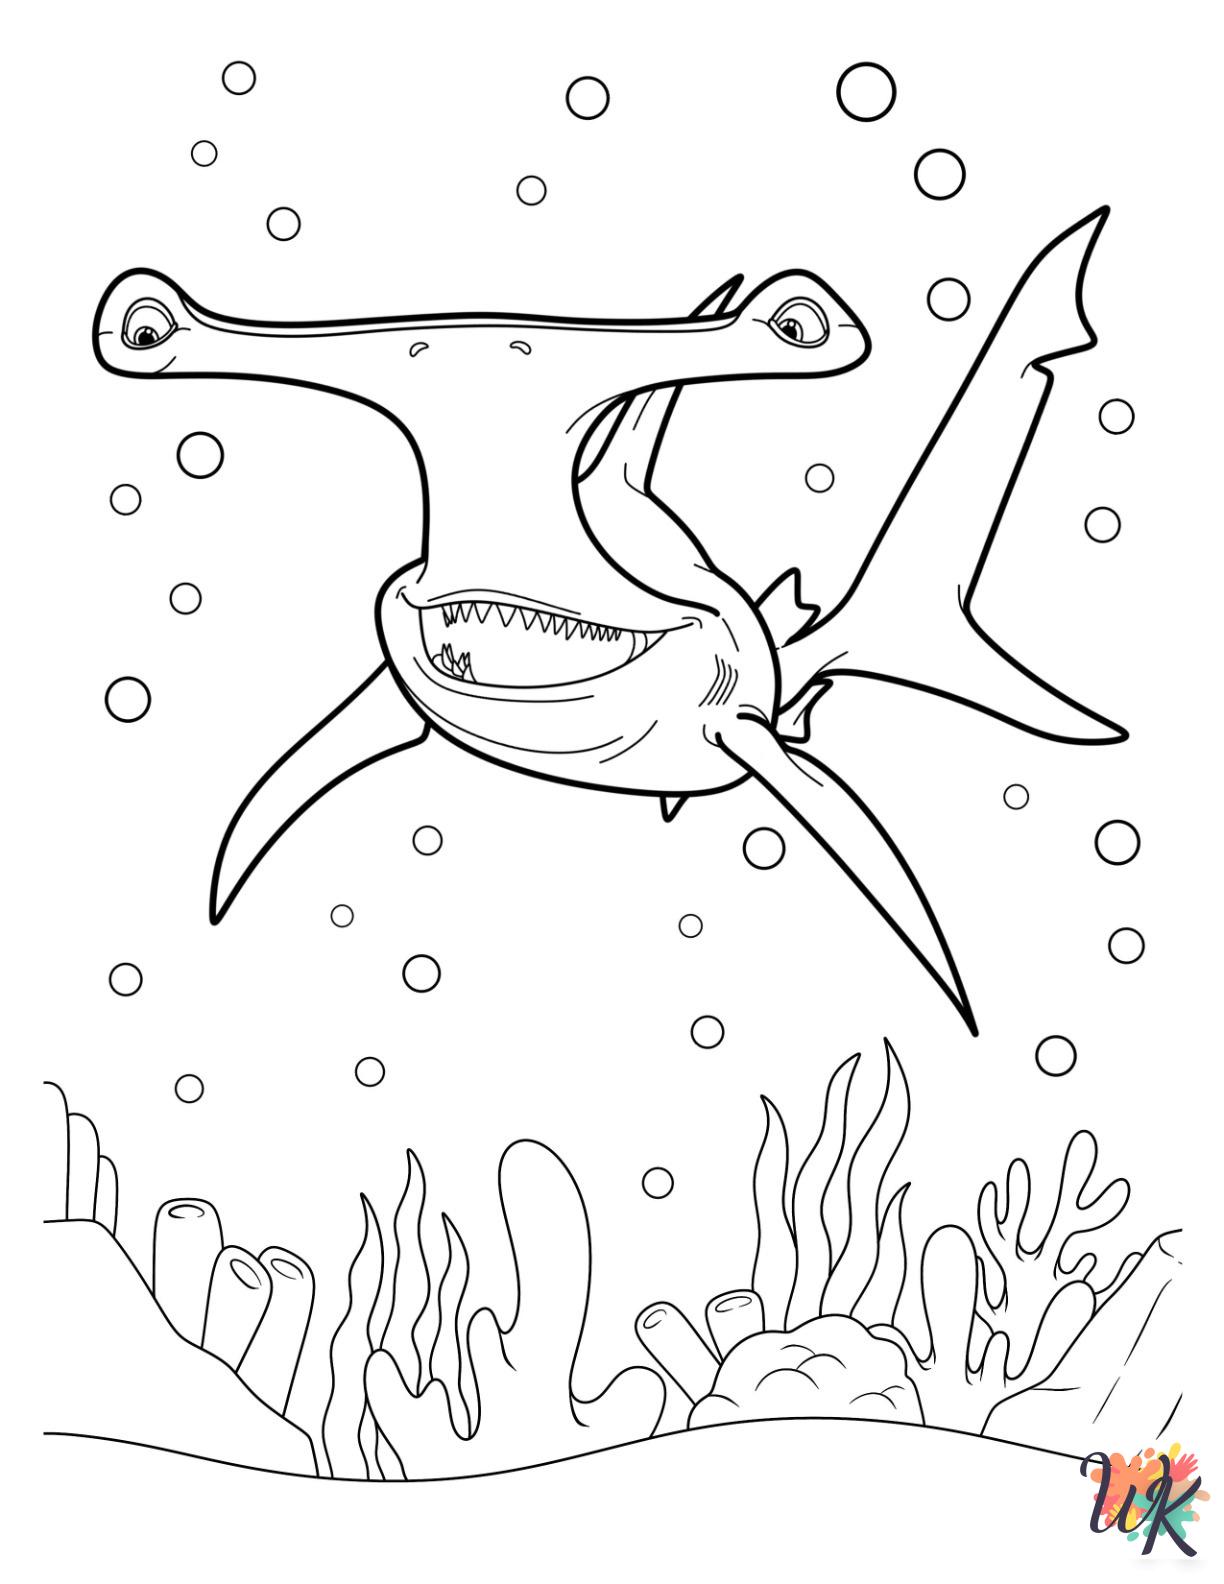 Hammerhead Shark coloring pages free